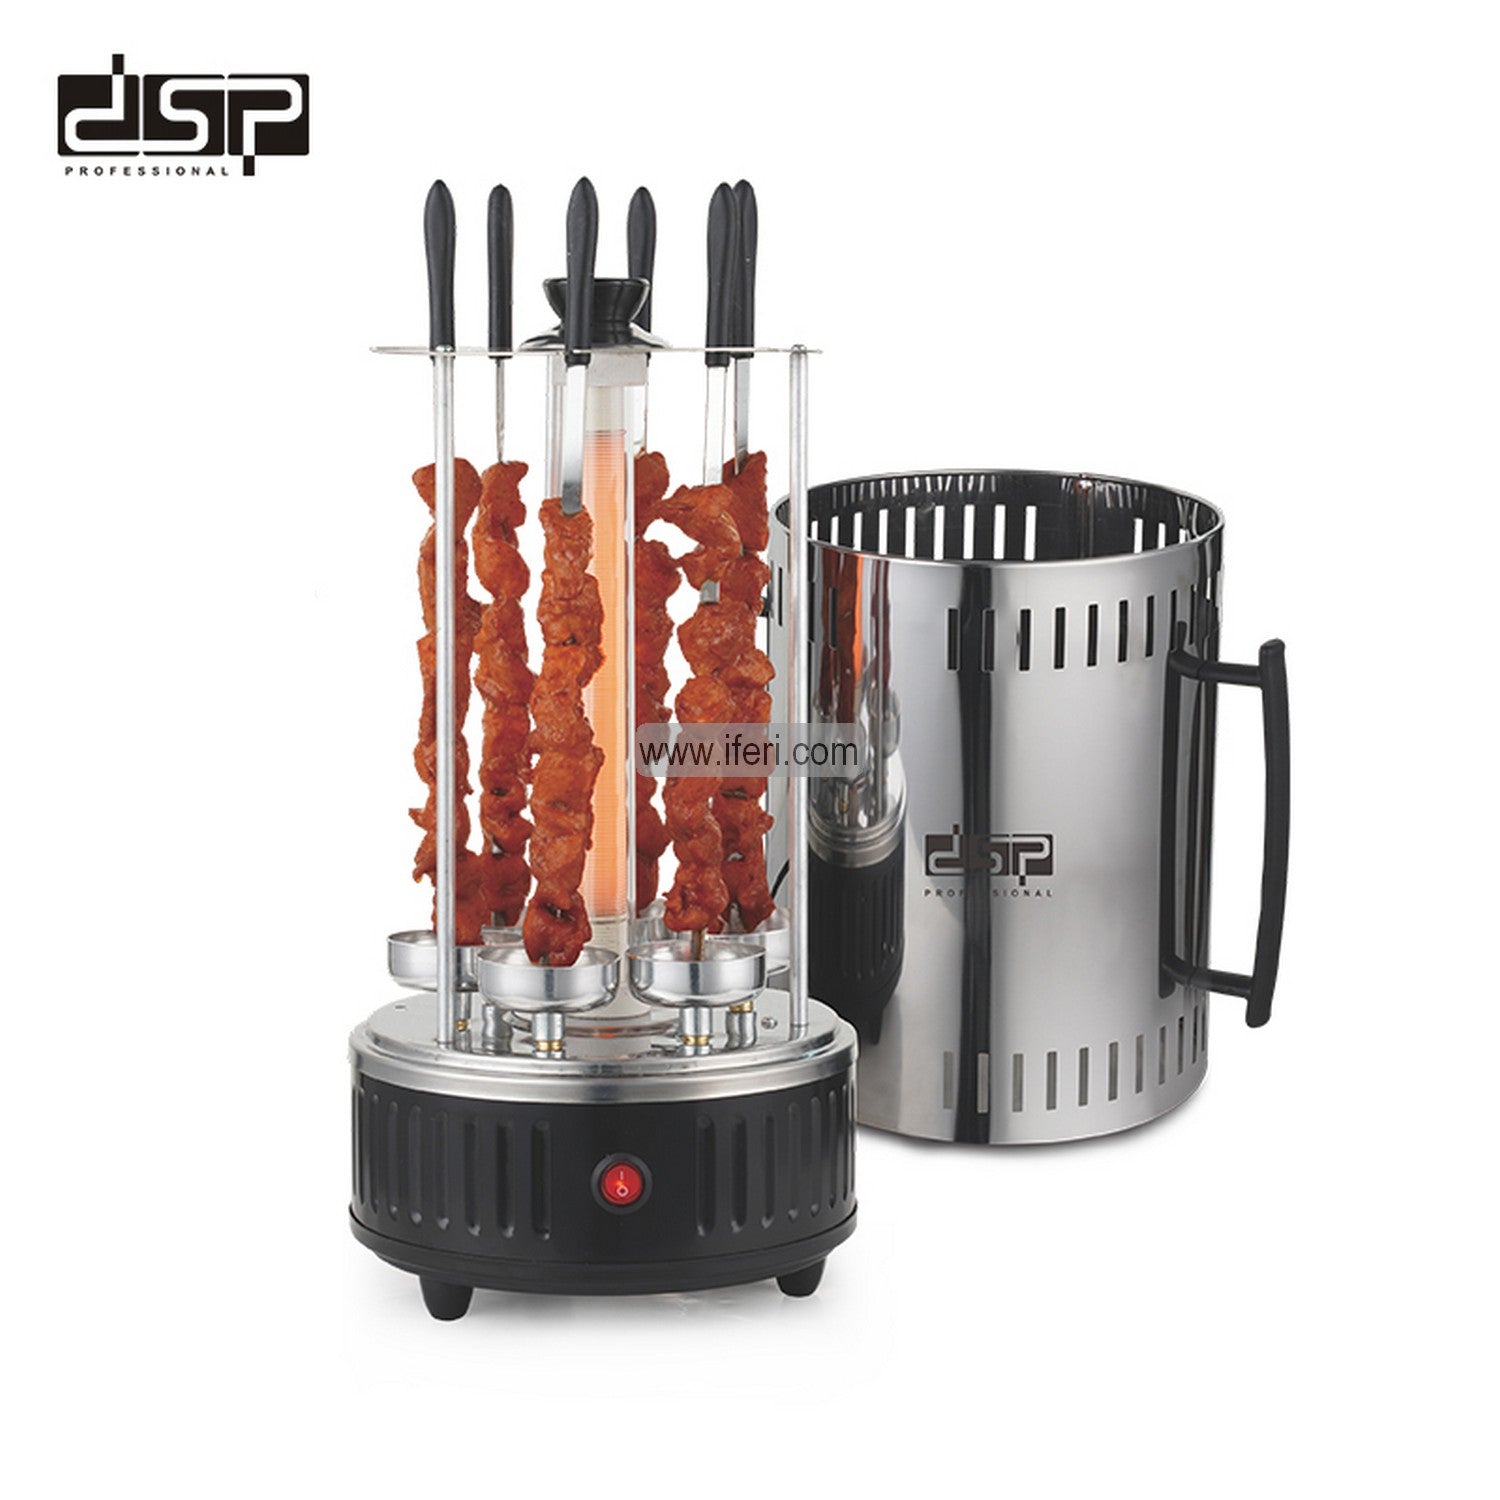 3 in 1 Electric BBQ Kebab Grill Machine ,1000W Automatic Rotating